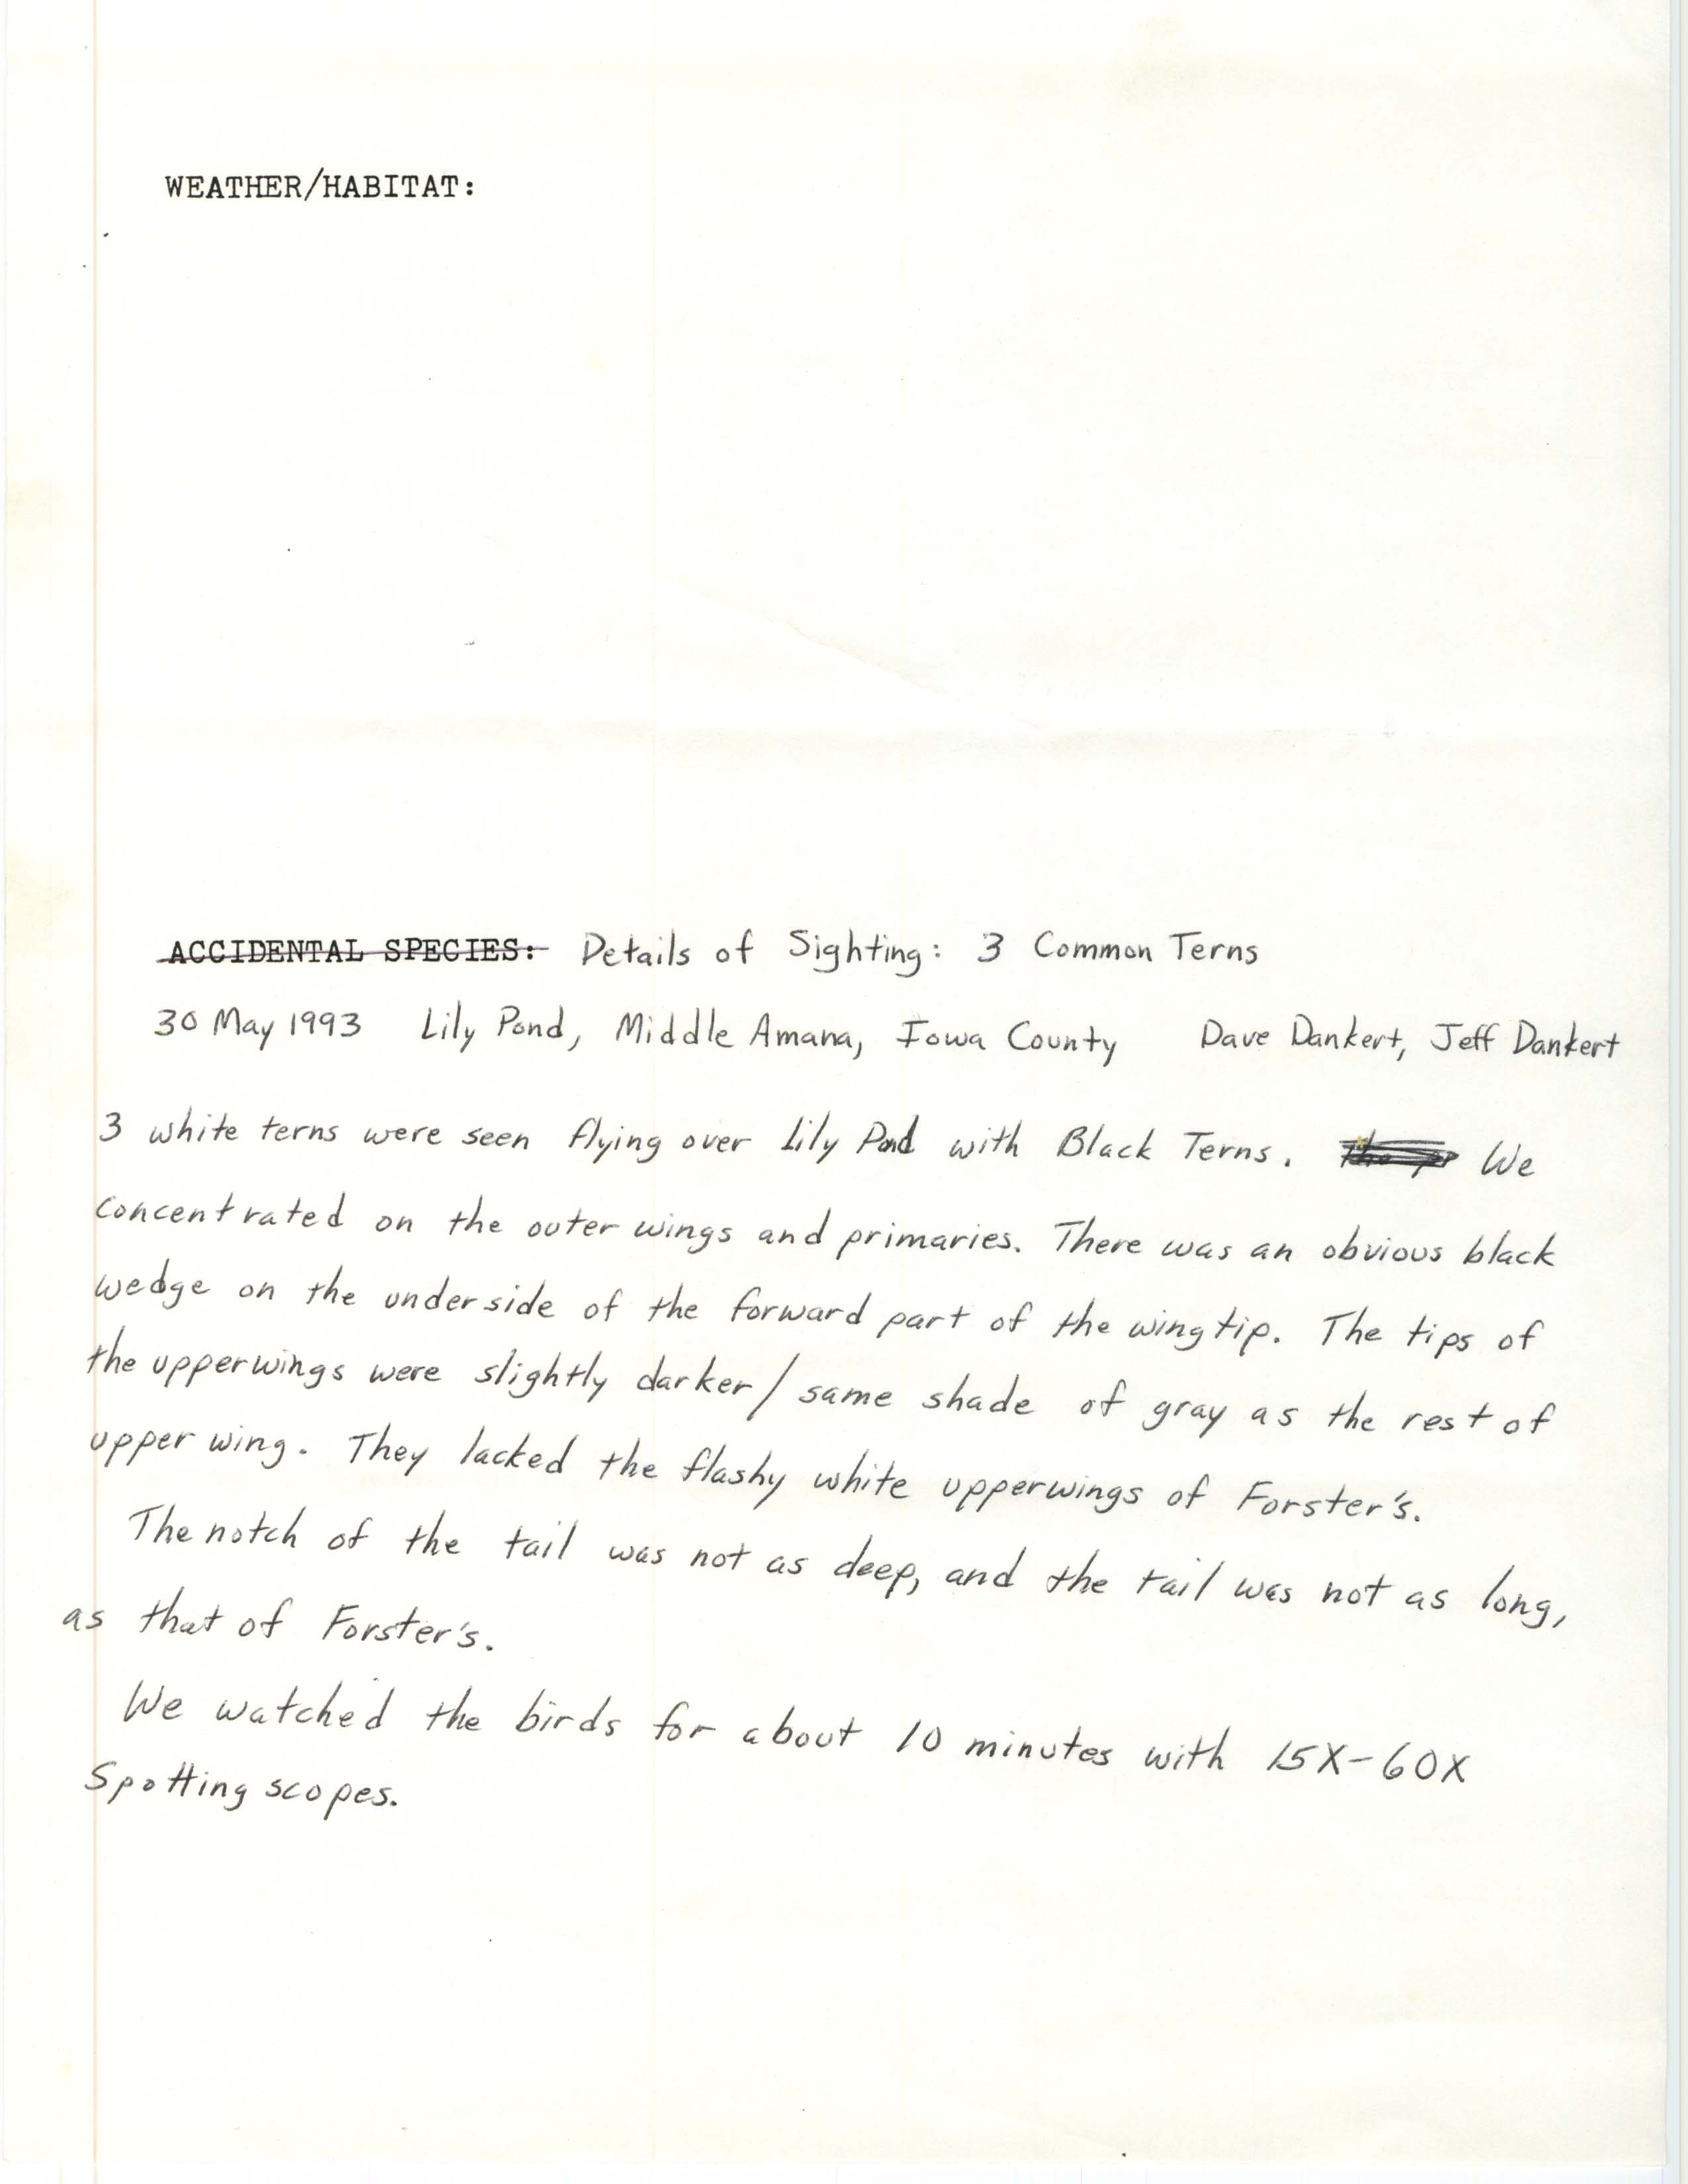 Rare bird documentation form for Common Tern at Lily Pond at the Amana Colonies, 1993